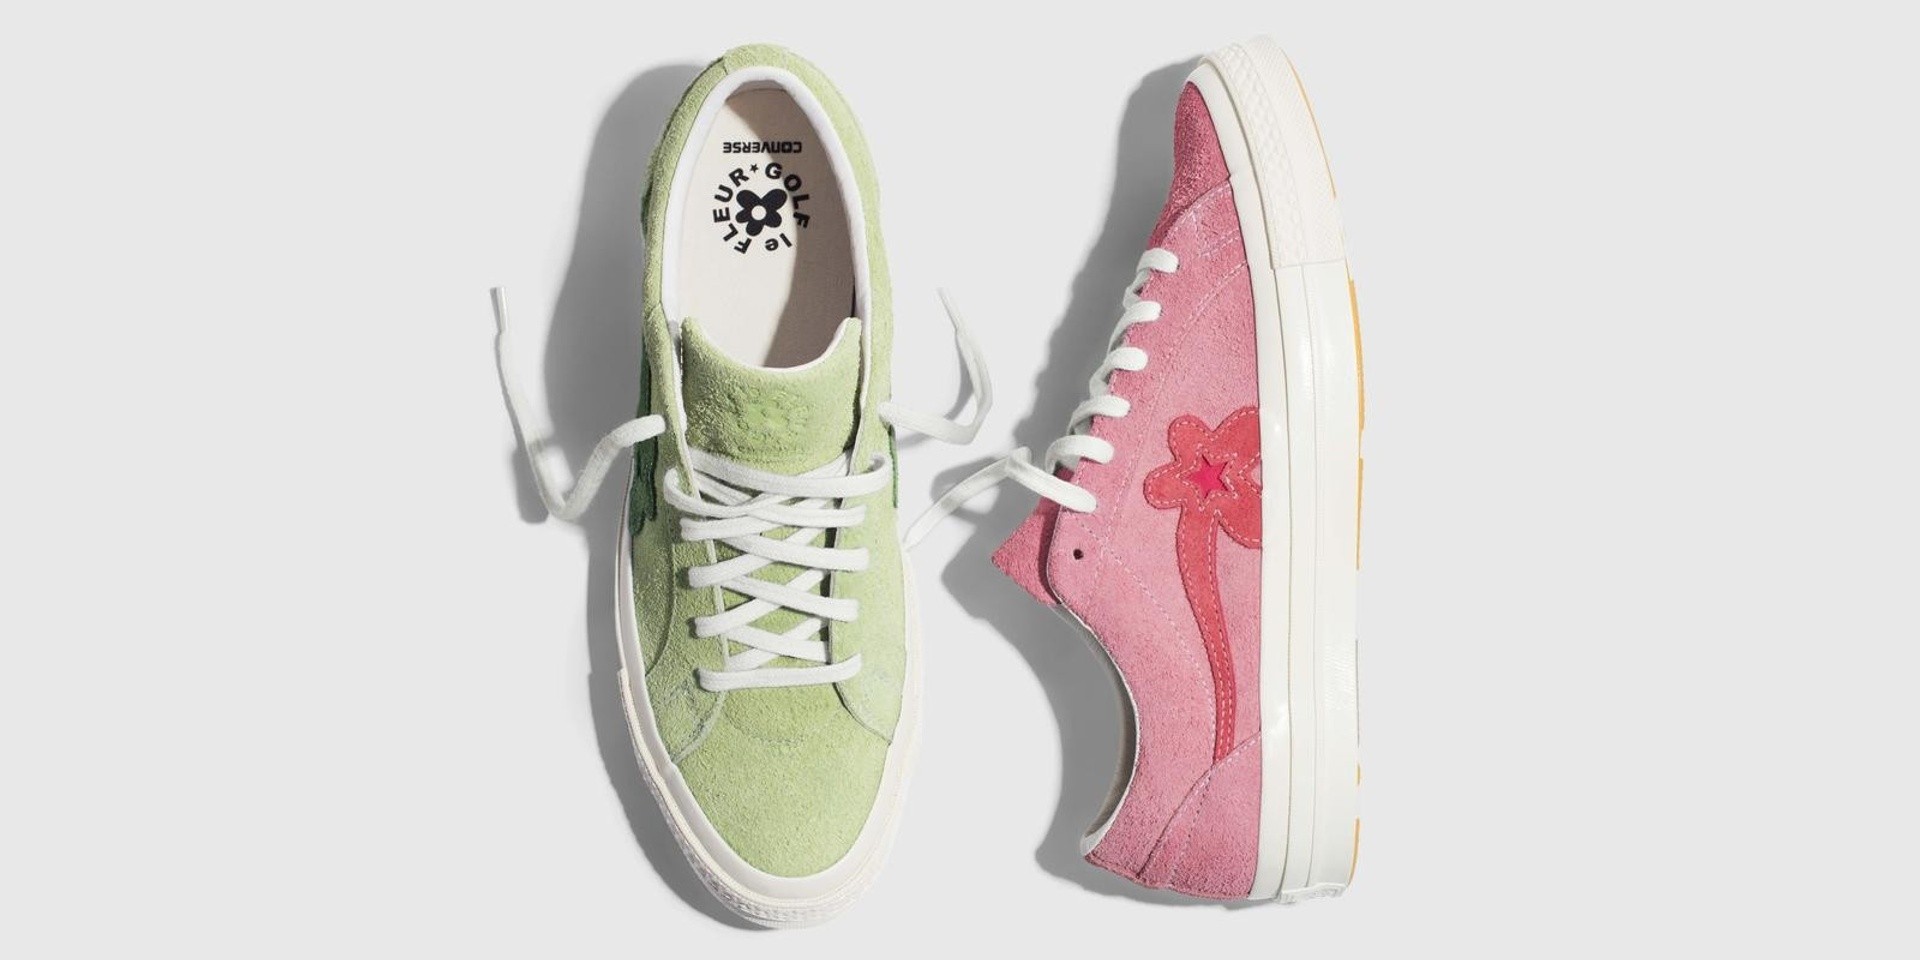 Tyler, The Creator's Converse line arrives in Singapore 